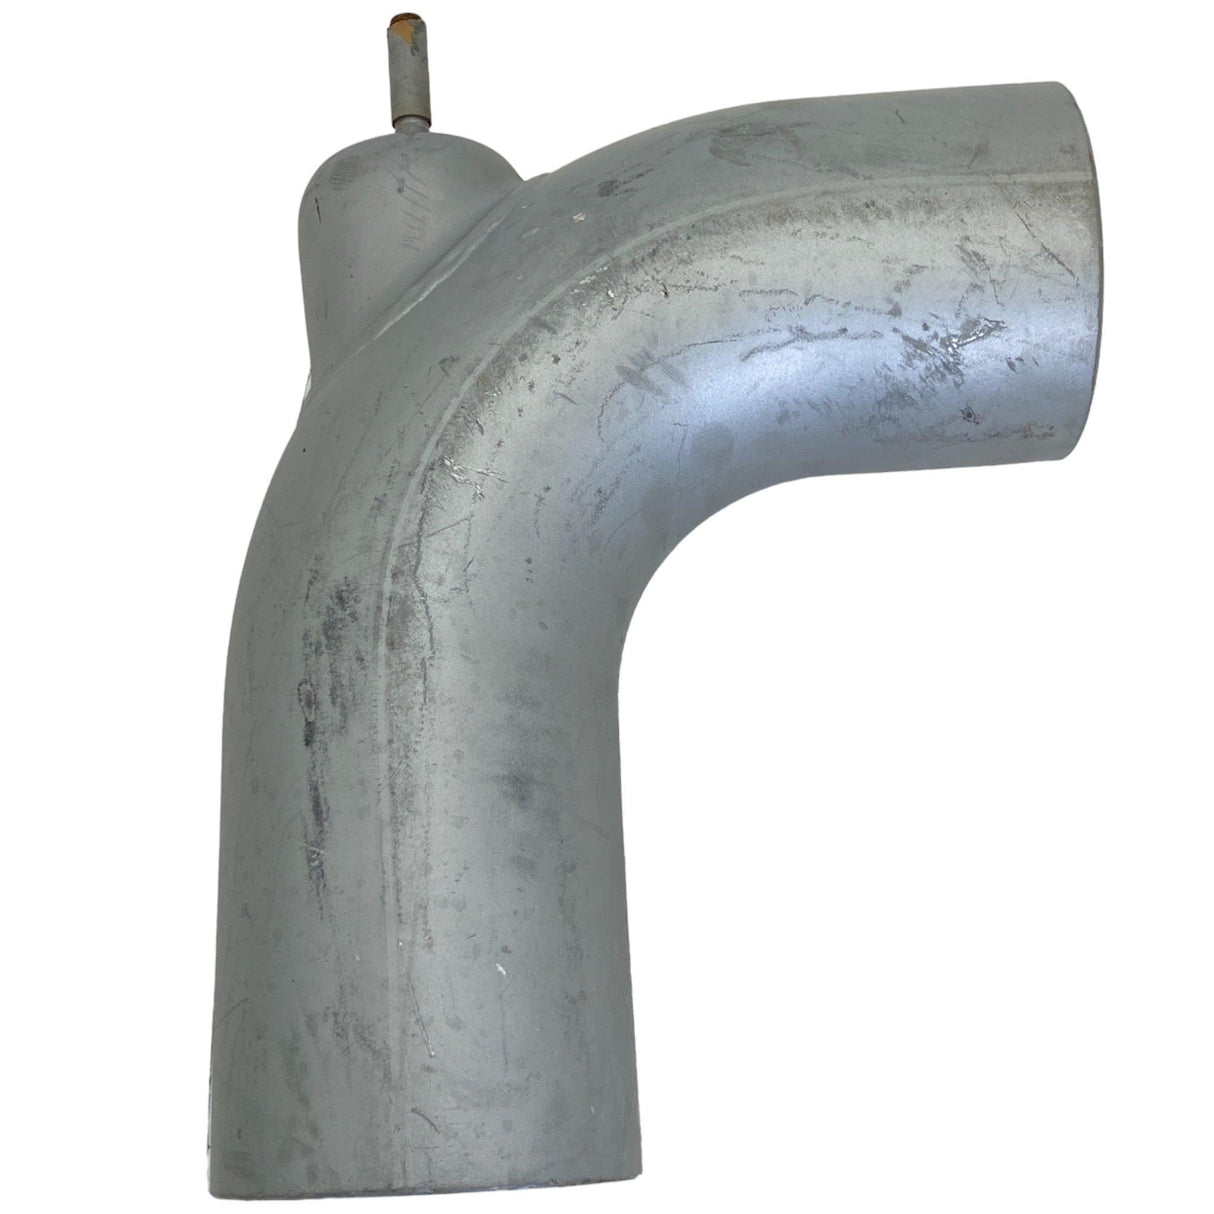 A04-17476-000 Genuine Freightliner® Exhaust Elbow 90 Degree 5 Od For Columbia.